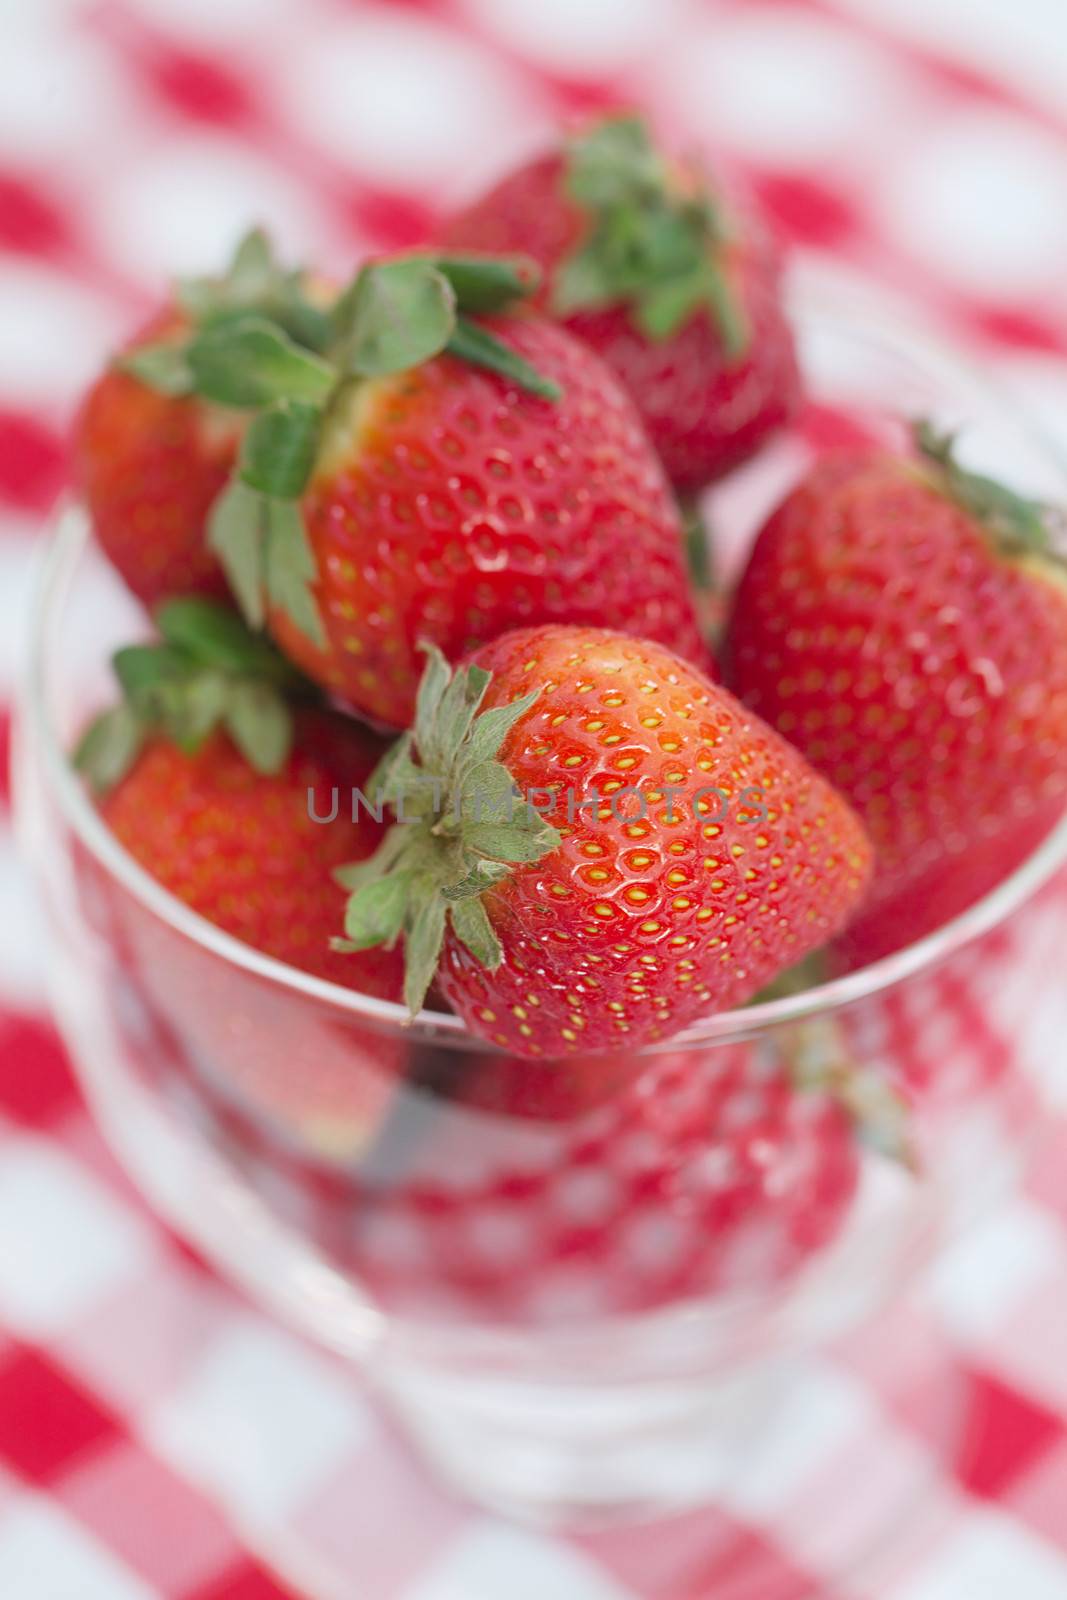 strawberry in a glass bowl on checkered fabric by jannyjus